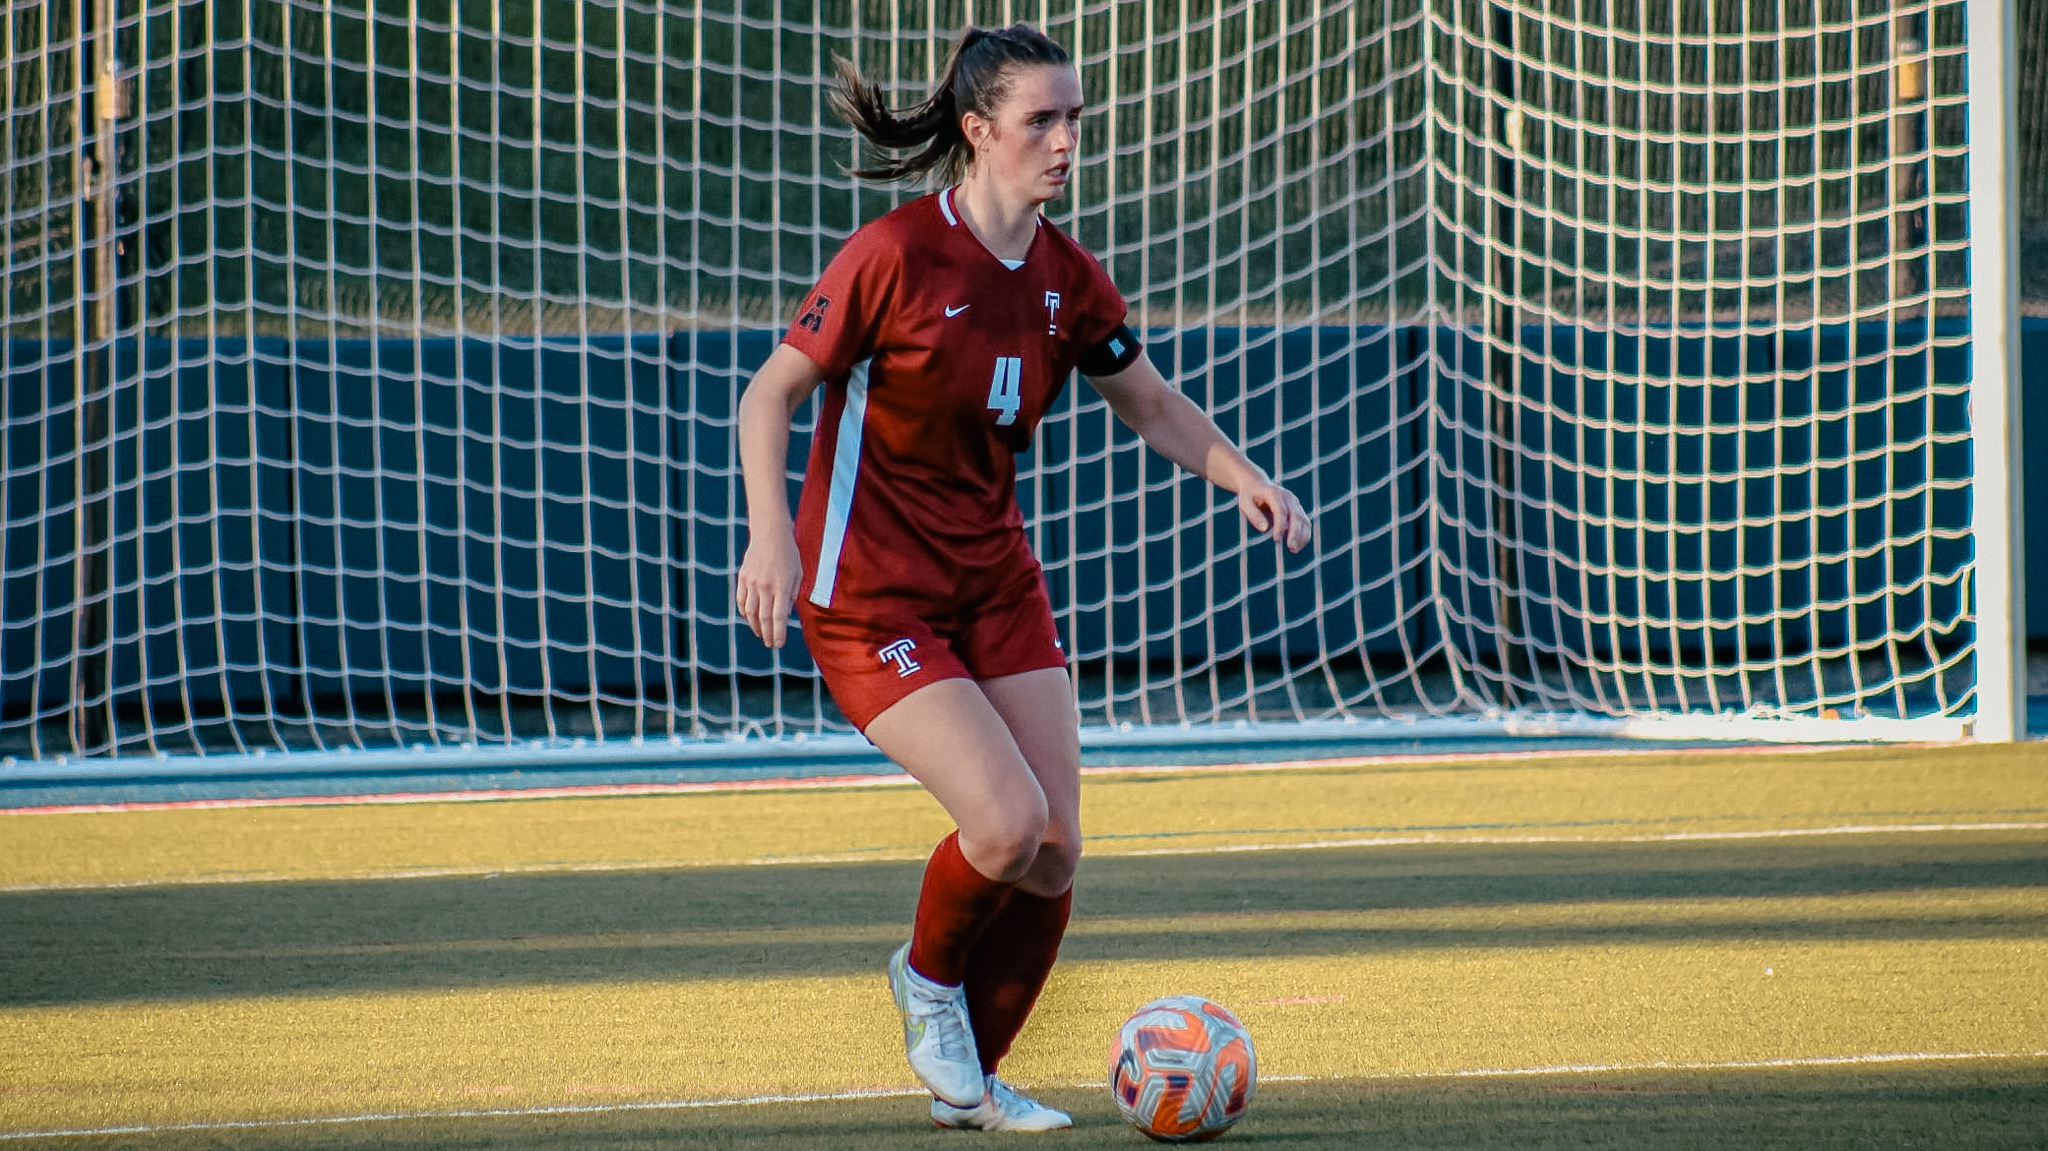 Róisín McGovern Joins Tormenta FC’s 2023 USL W League Roster featured image